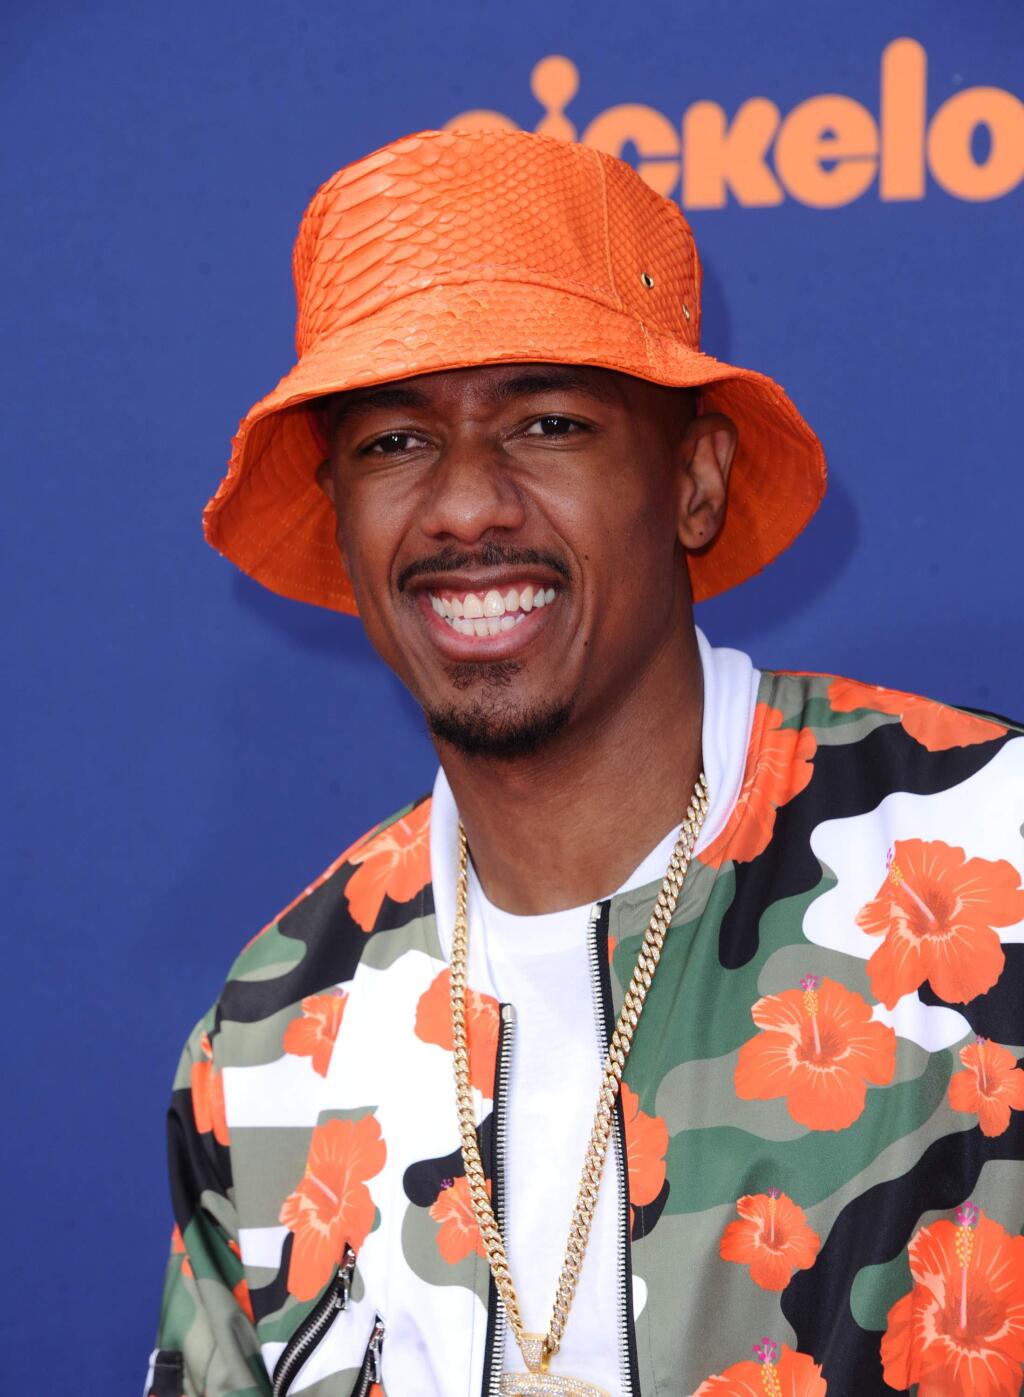 Nick Cannon arrives at the 2015 Kids' Choice Sports Awards at Pauley Pavilion on Thursday, July 16, 2015 in Los Angeles. (Photo by Richard Shotwell/Invision/AP)